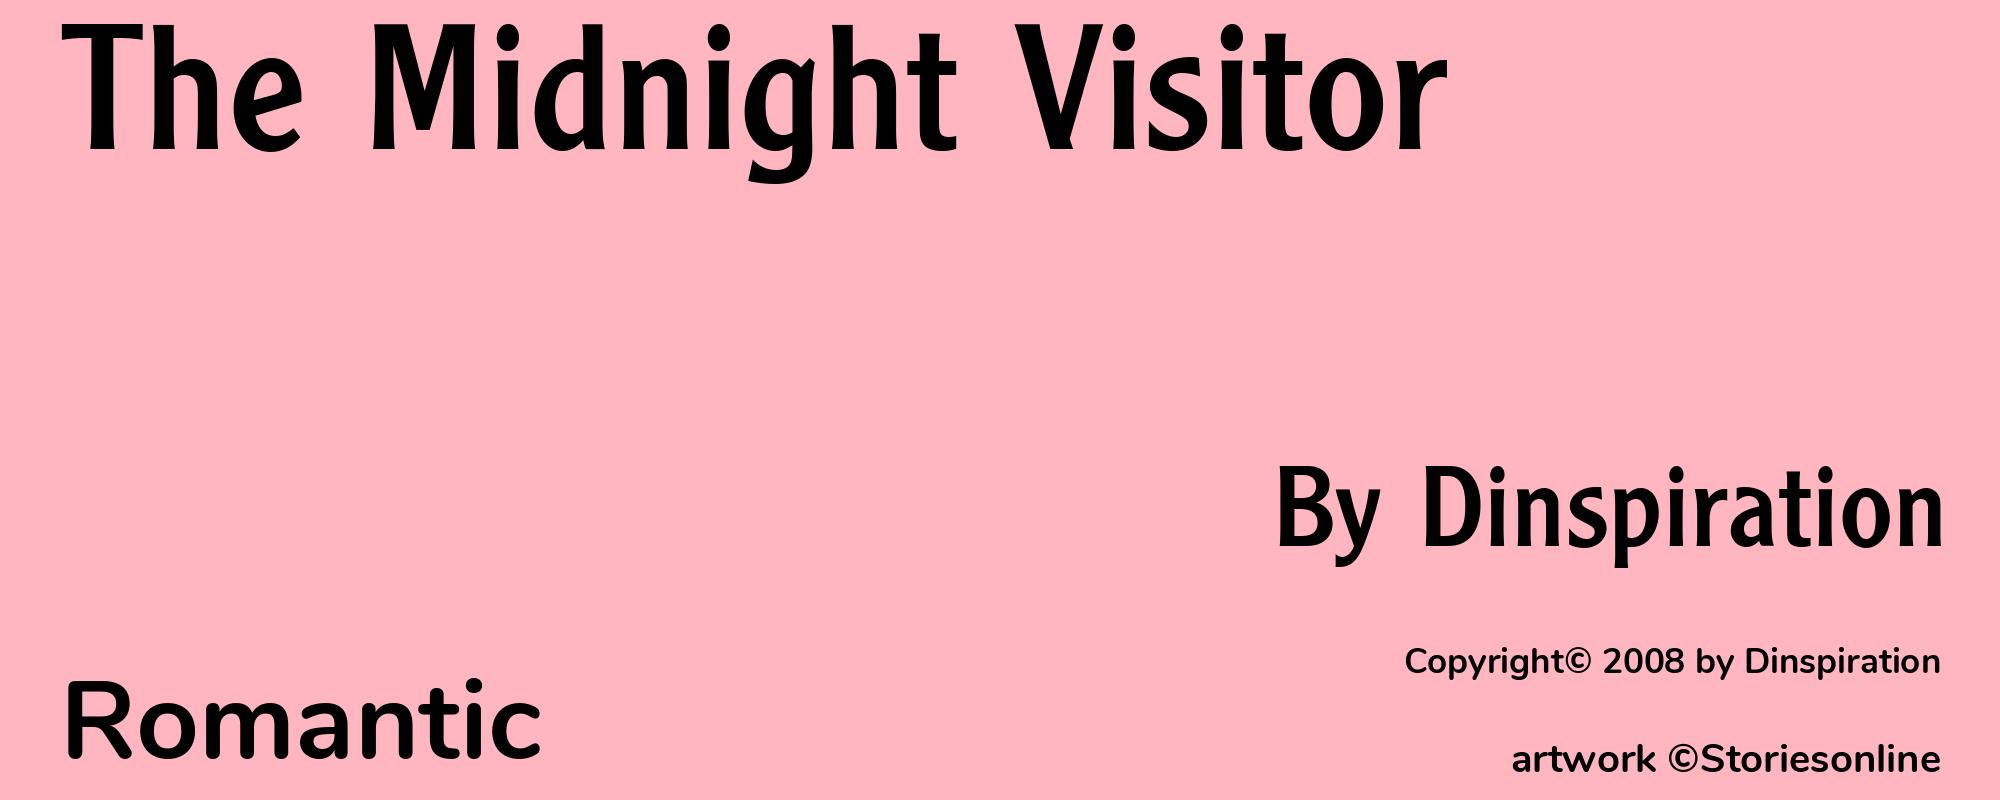 The Midnight Visitor - Cover